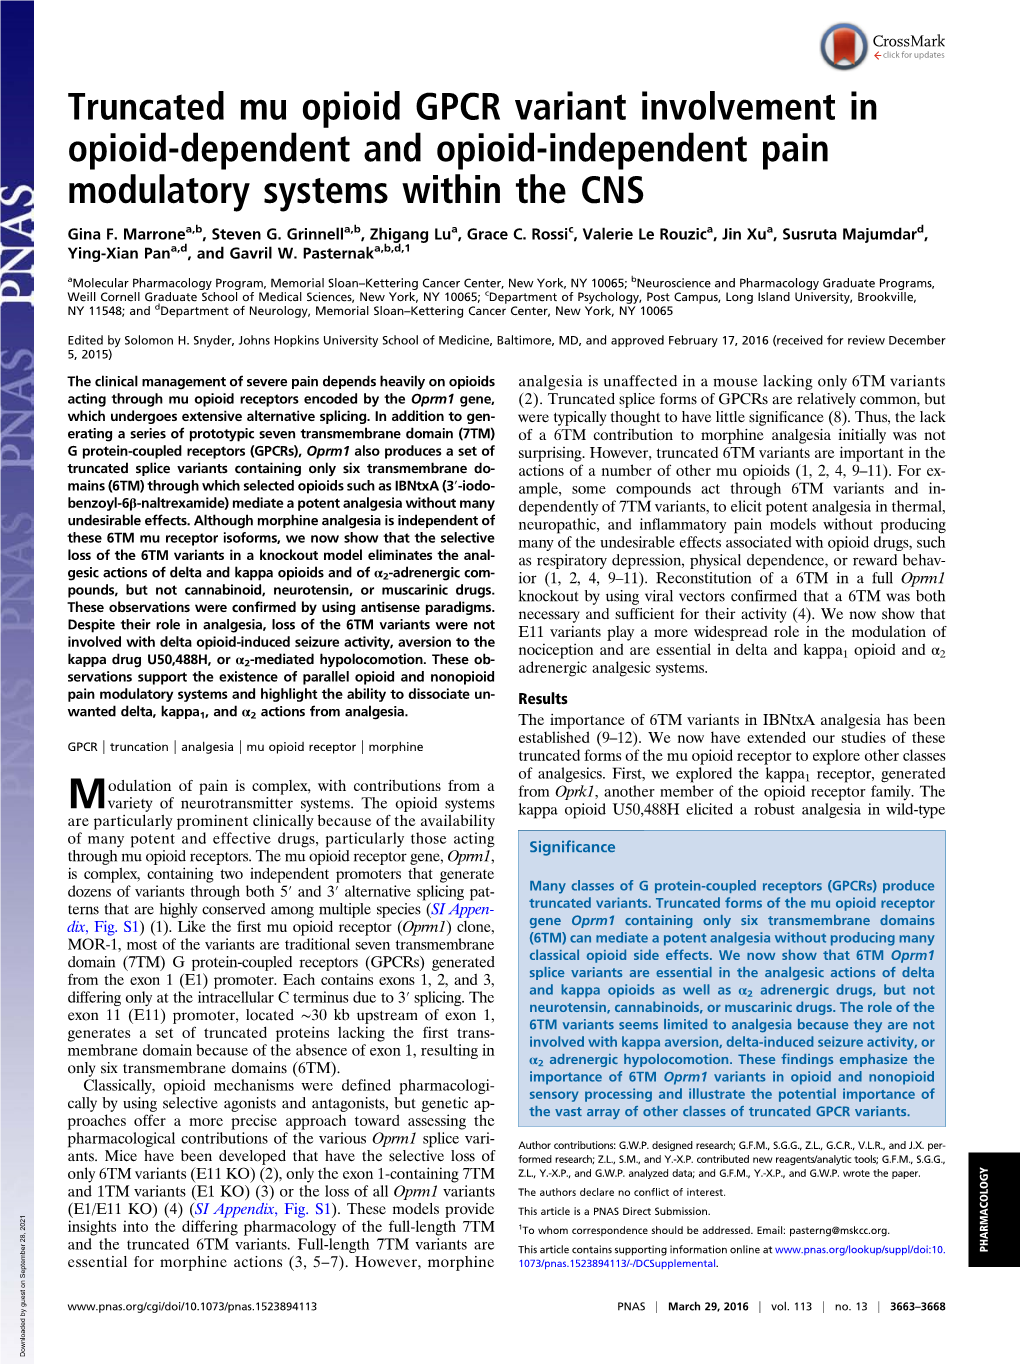 Truncated Mu Opioid GPCR Variant Involvement in Opioid-Dependent and Opioid-Independent Pain Modulatory Systems Within the CNS